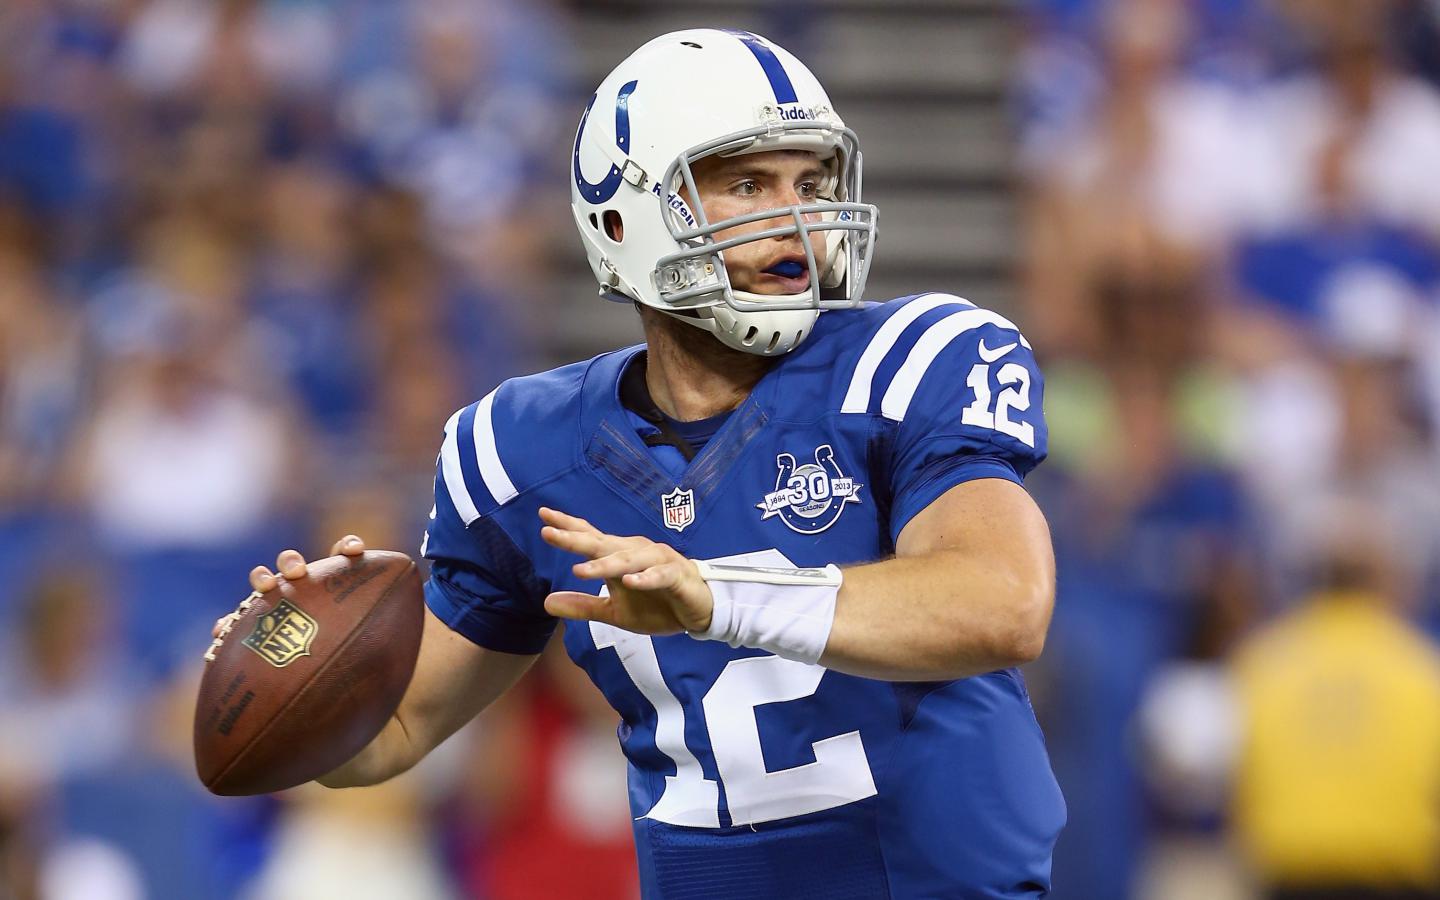 Colts HD Wallpaper With Andrew Luck S Photo For